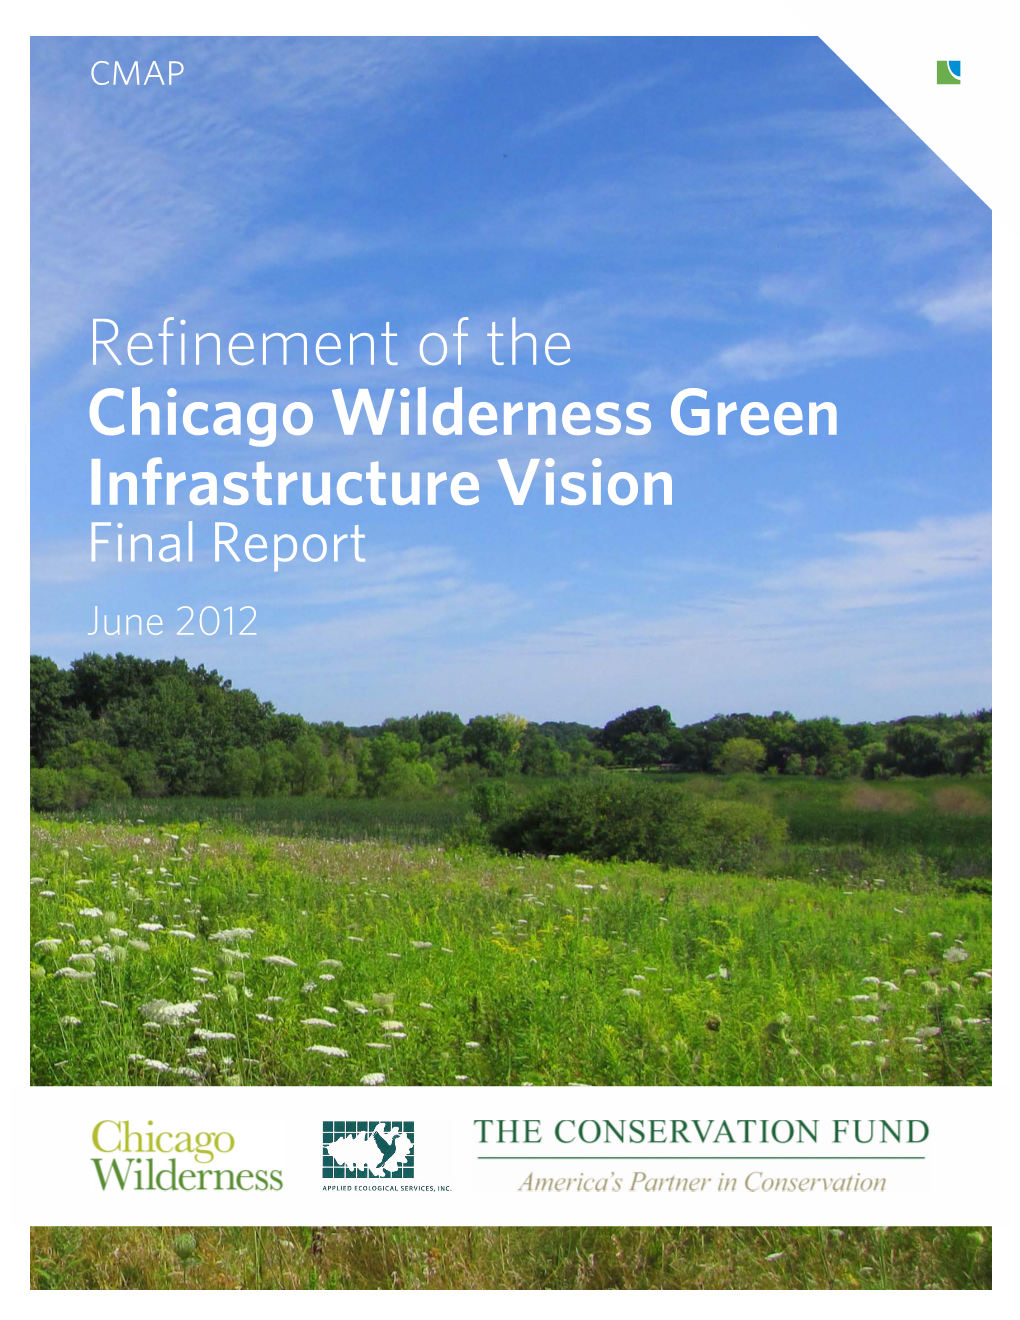 Refinement of the Chicago Wilderness Green Infrastructure Vision